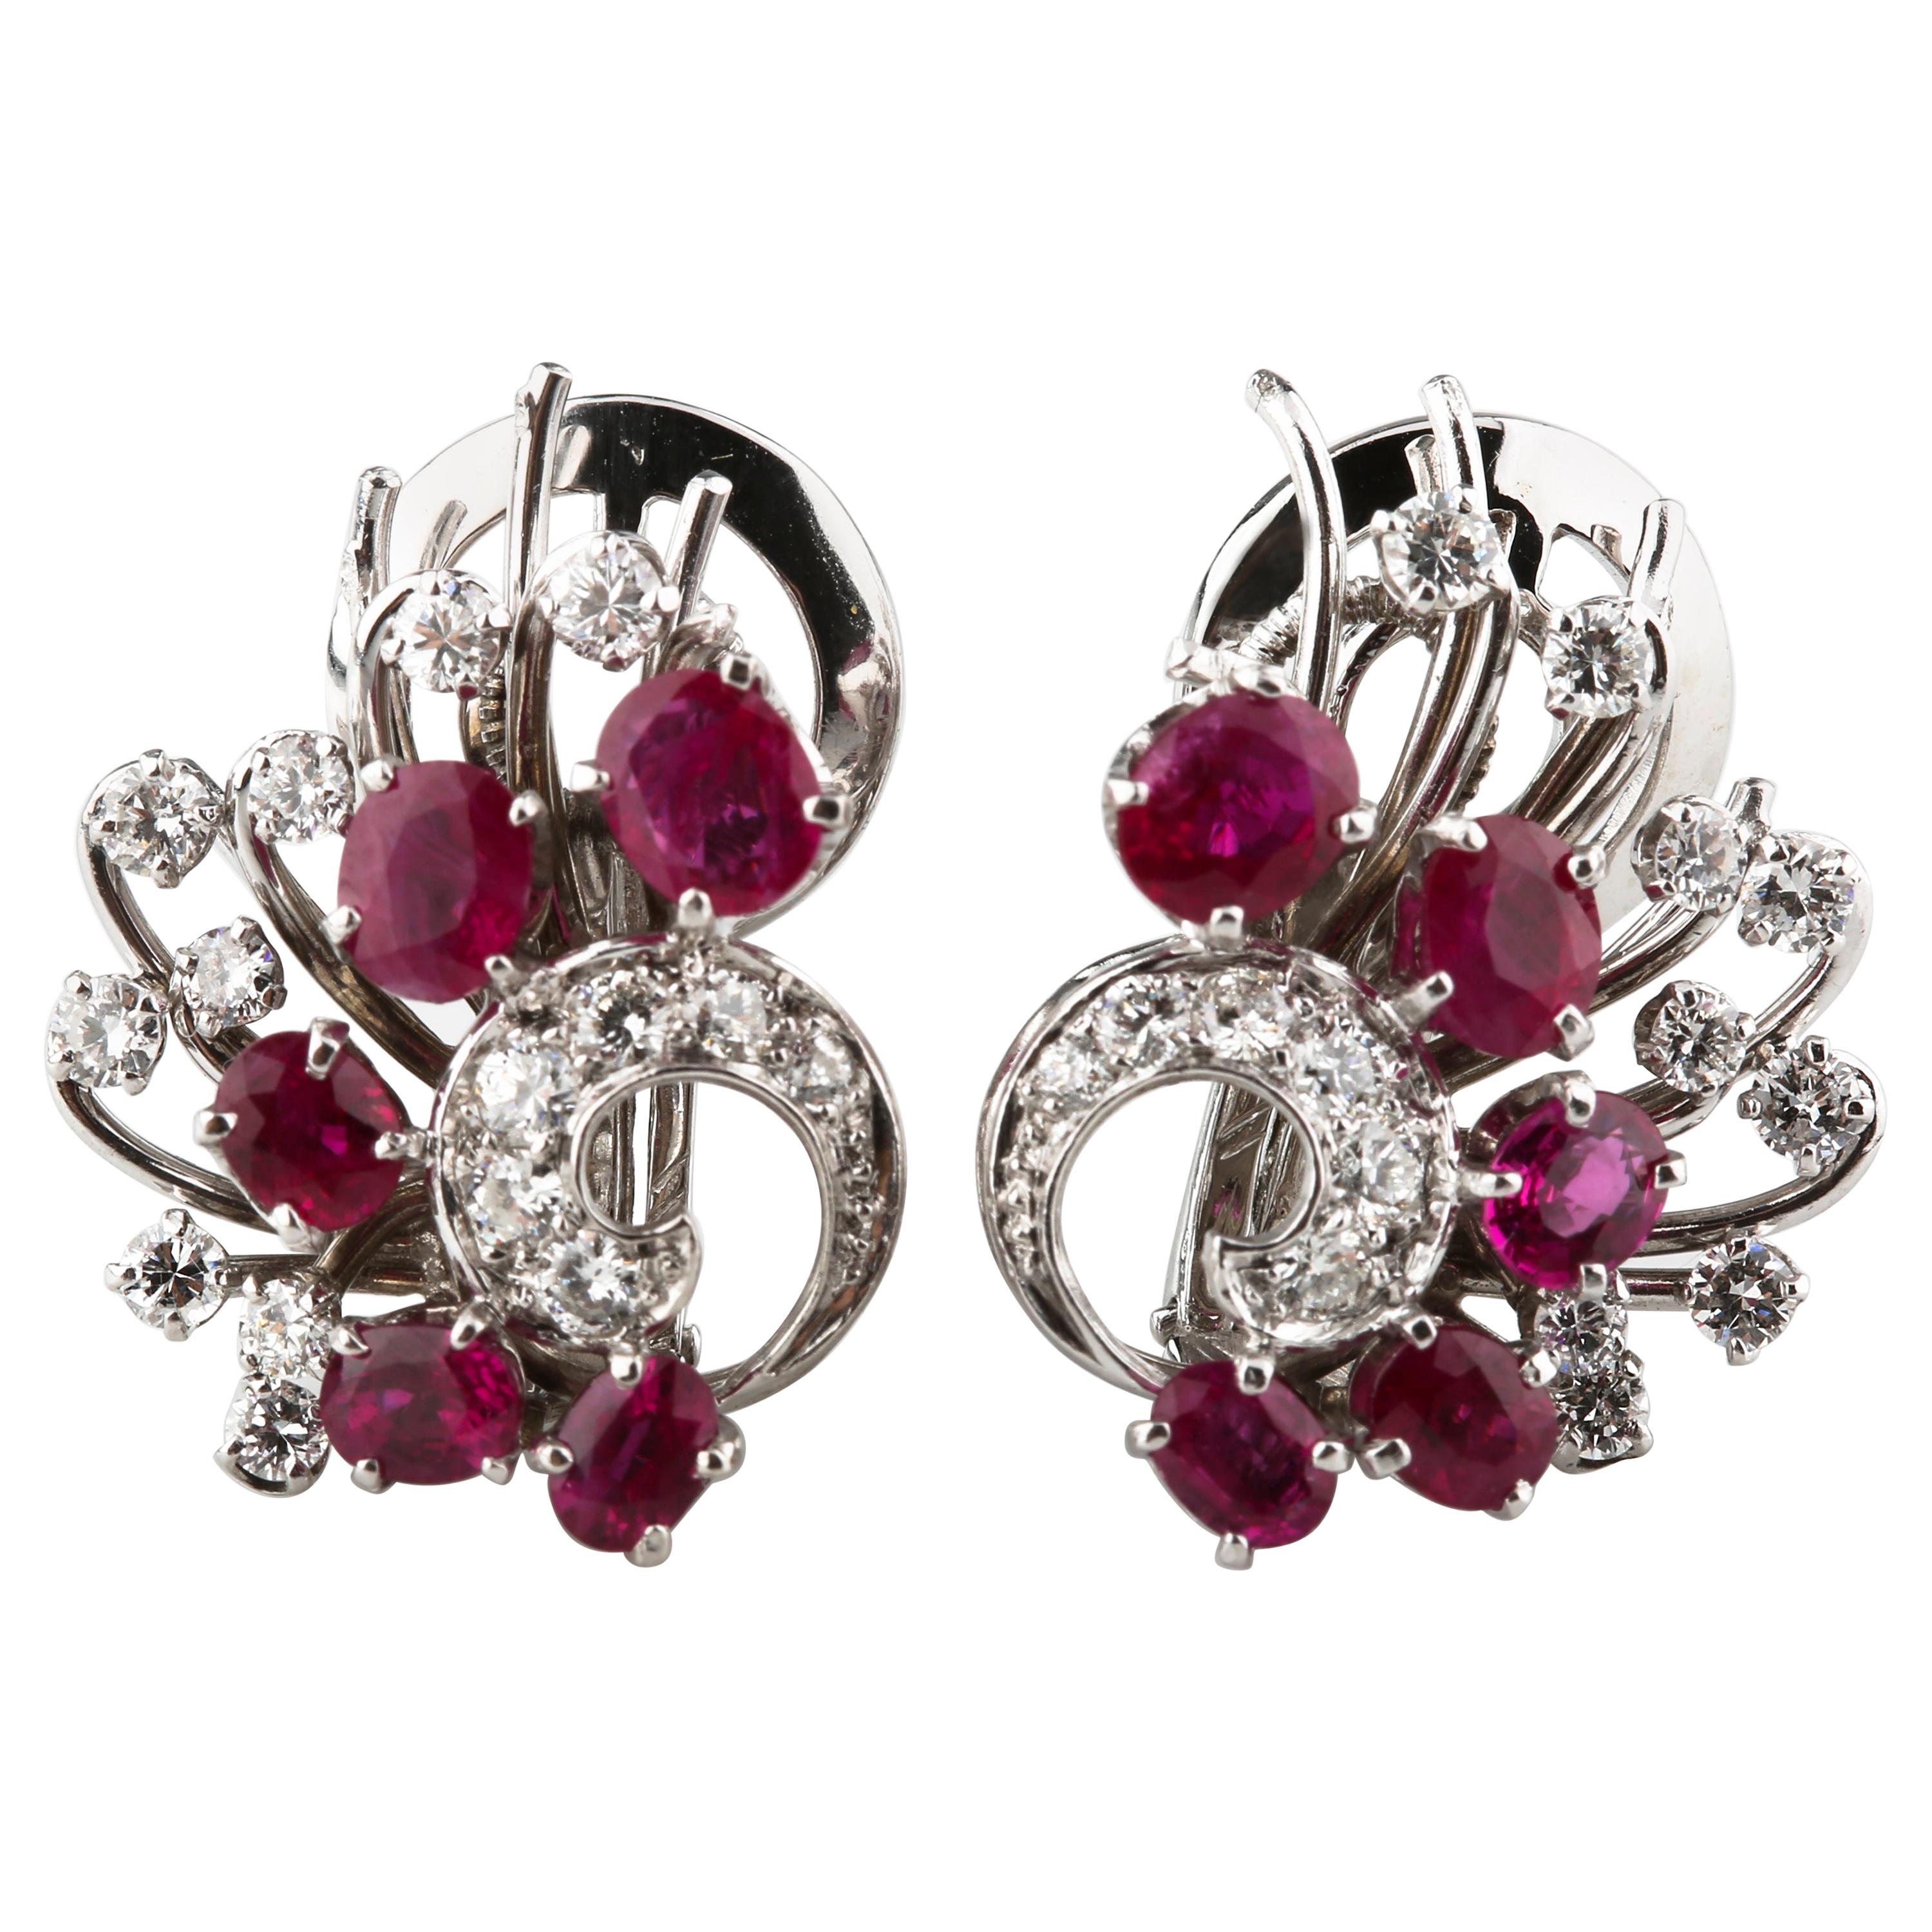 2.25 Carat Ruby and Diamond Ornate Clip-On Earrings in White Gold